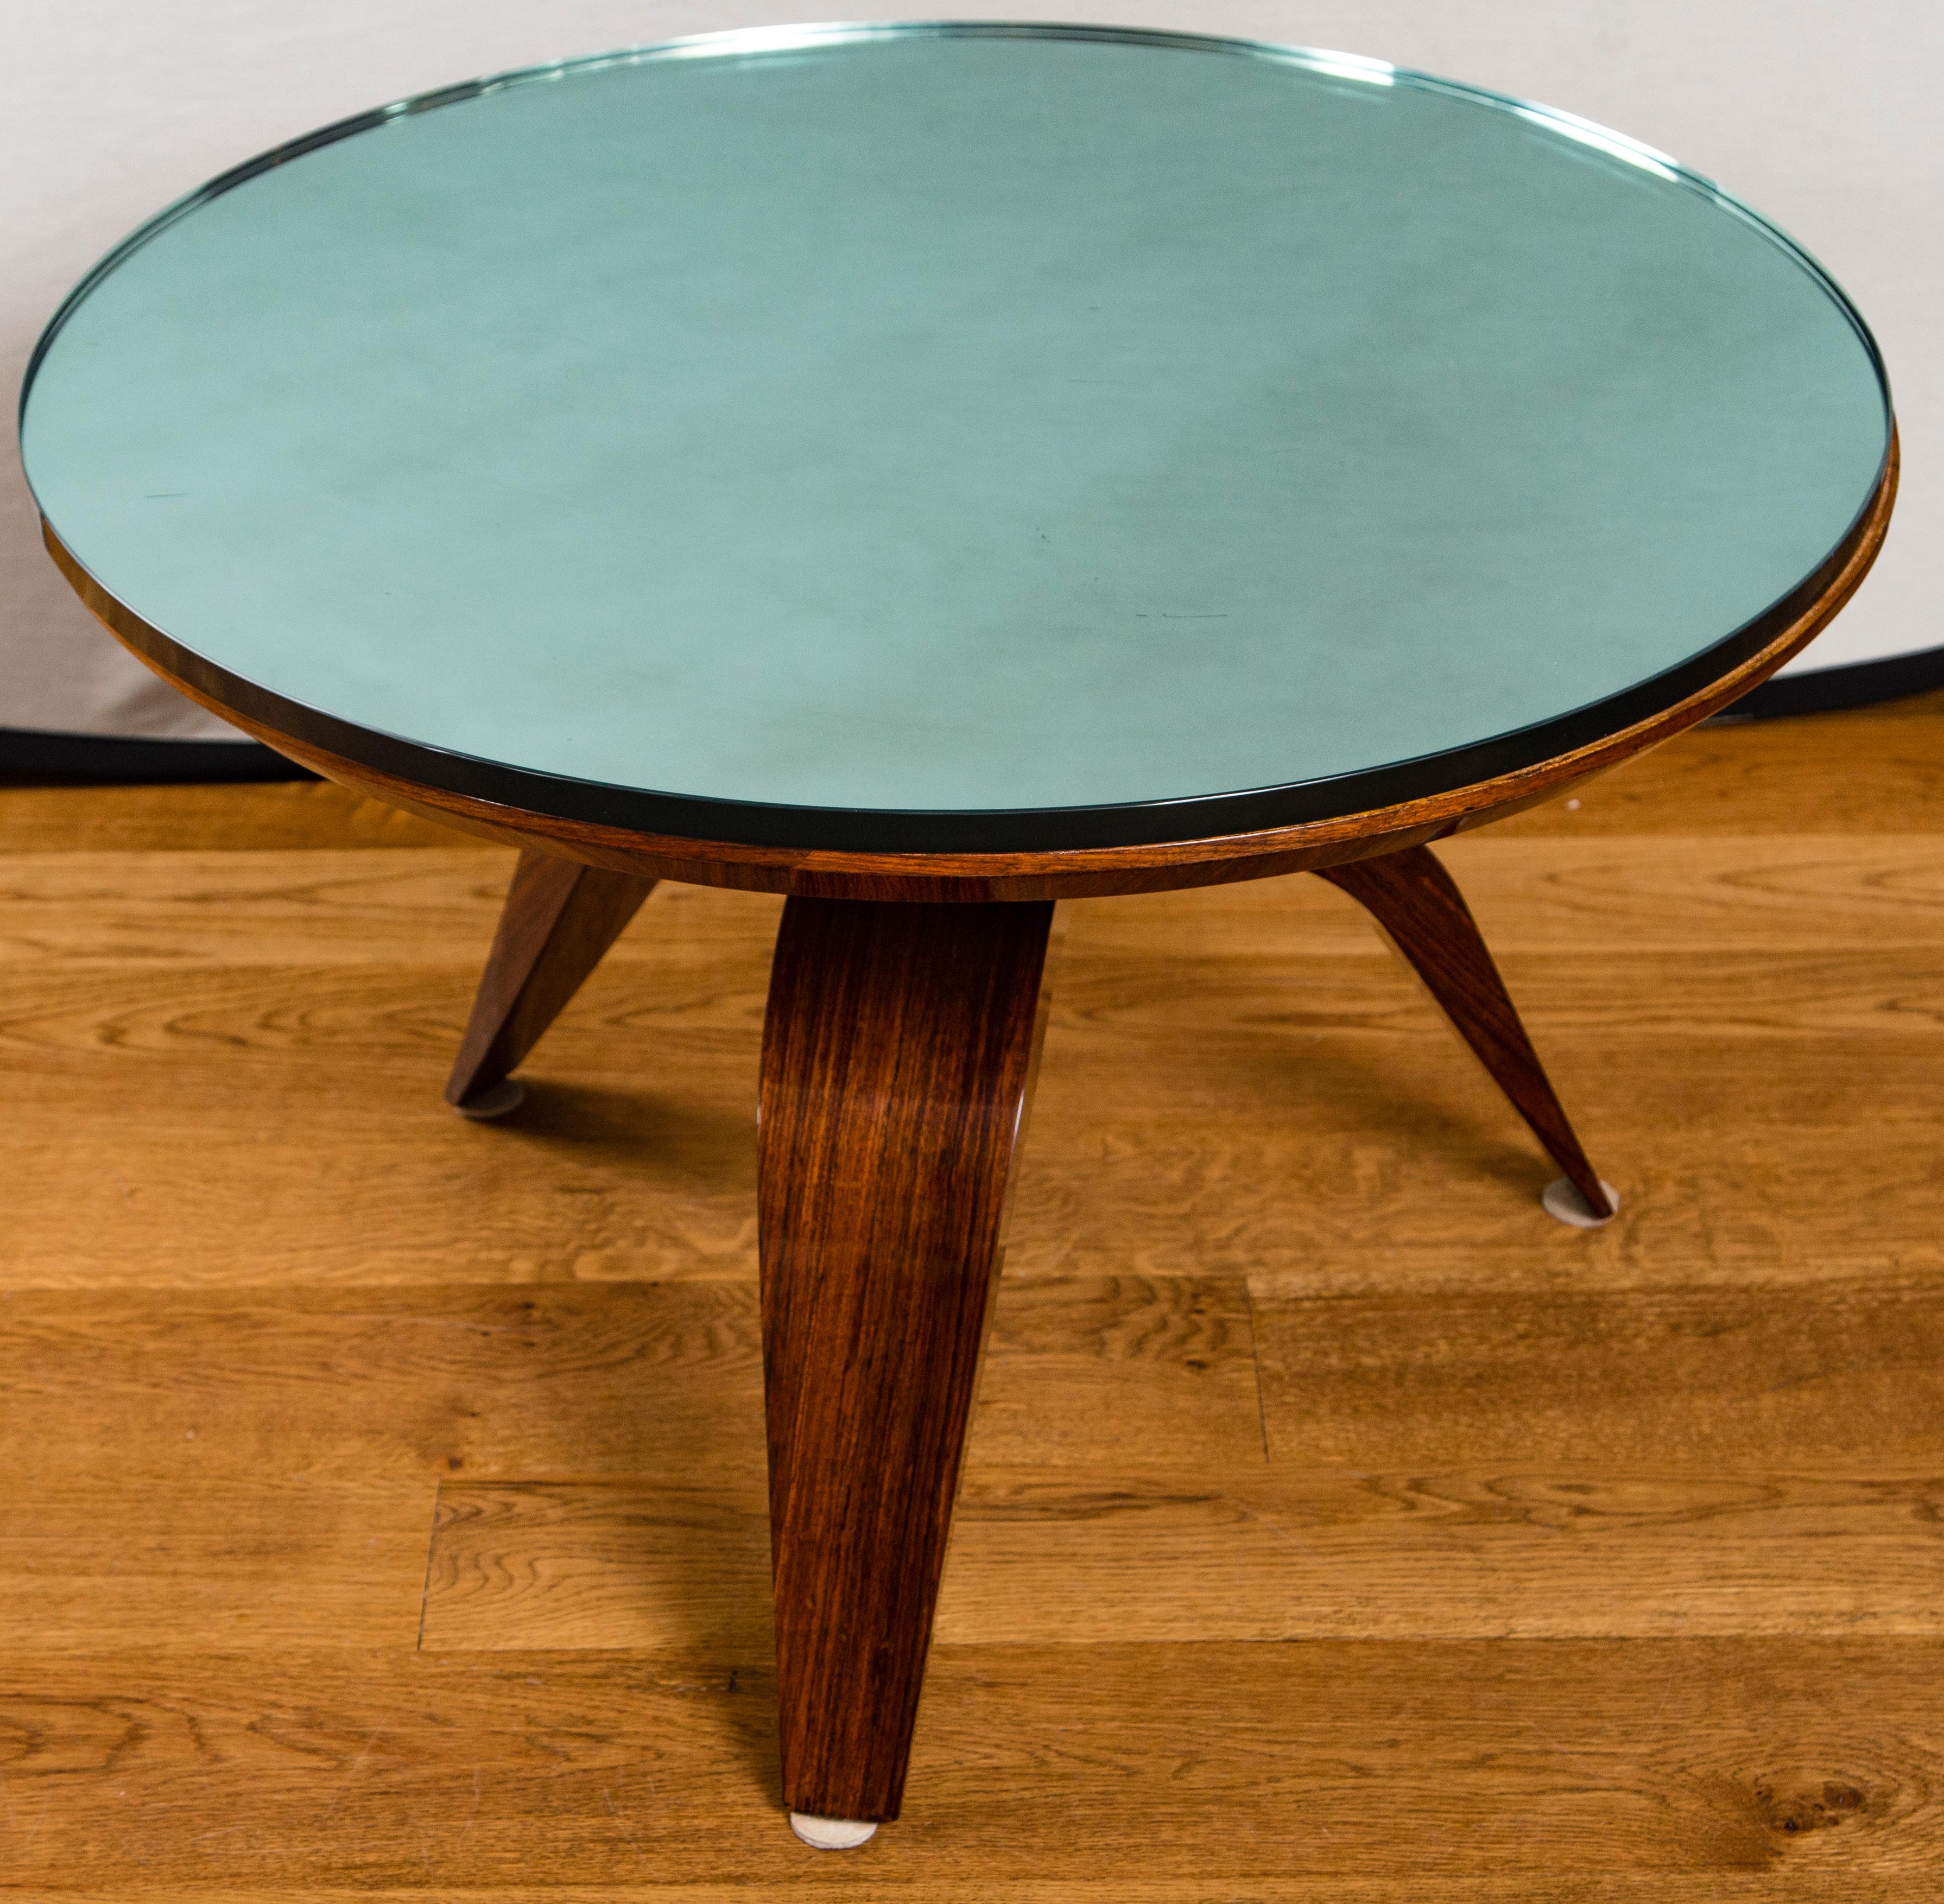 Mid-20th Century French Modernist Low Circular Table